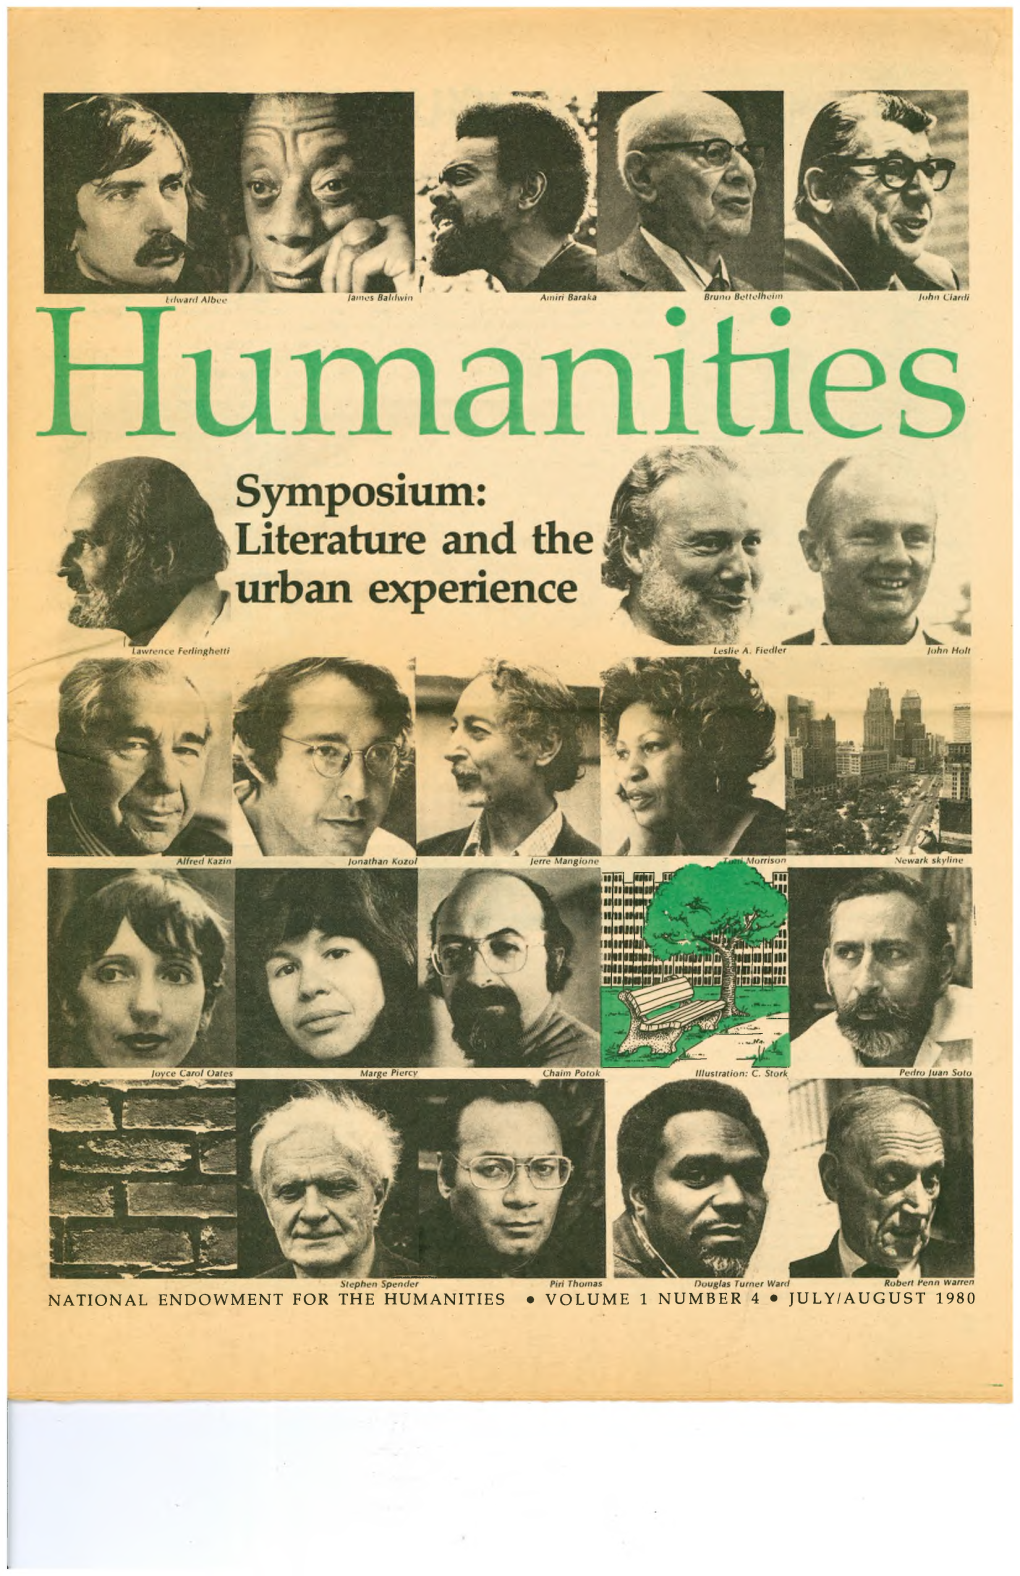 NATIONAL ENDOWMENT for the HUMANITIES • VOLUME 1 NUMBER 4 • JULY/AUGUST 1980 in This Issue